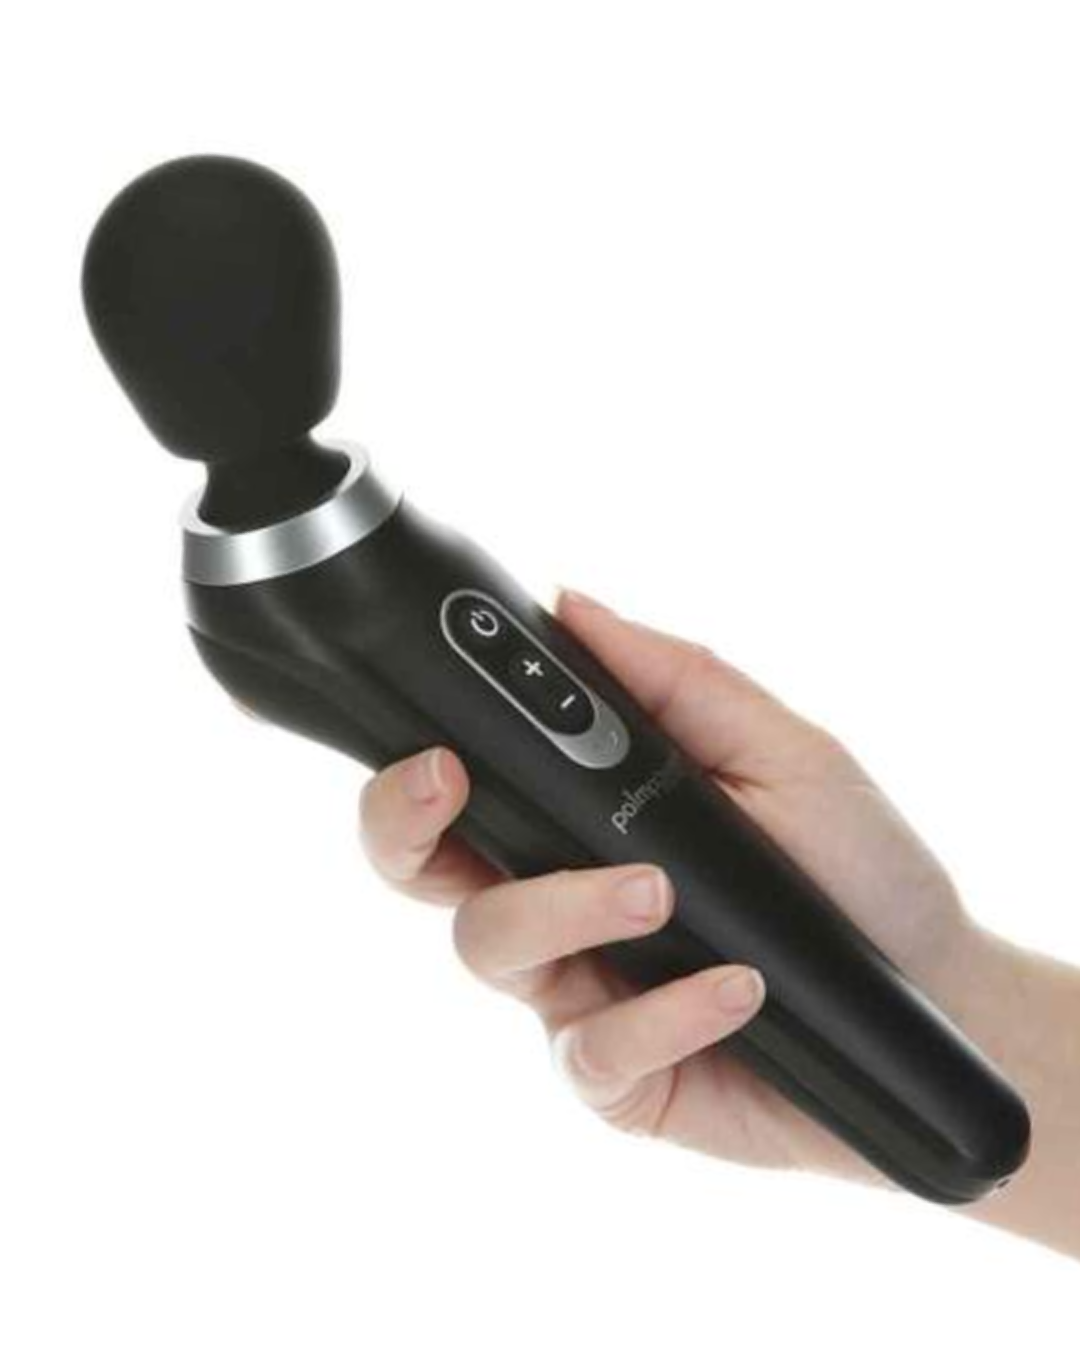 Palm Power Extreme Wand Vibrator with Angled Grip